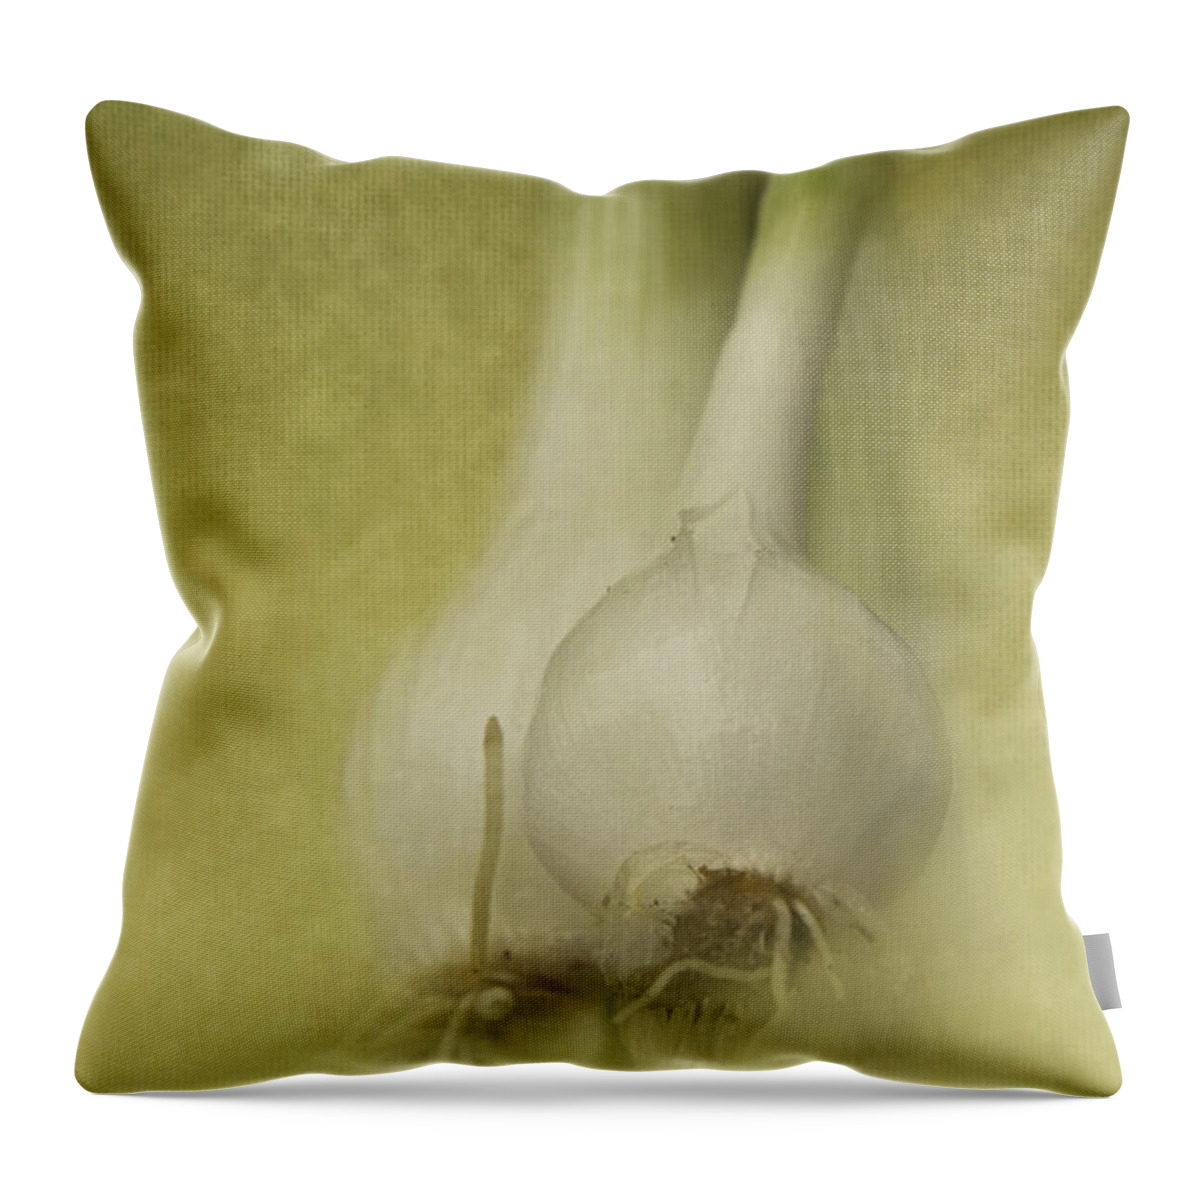 Onion Throw Pillow featuring the photograph Onions by Pam Holdsworth